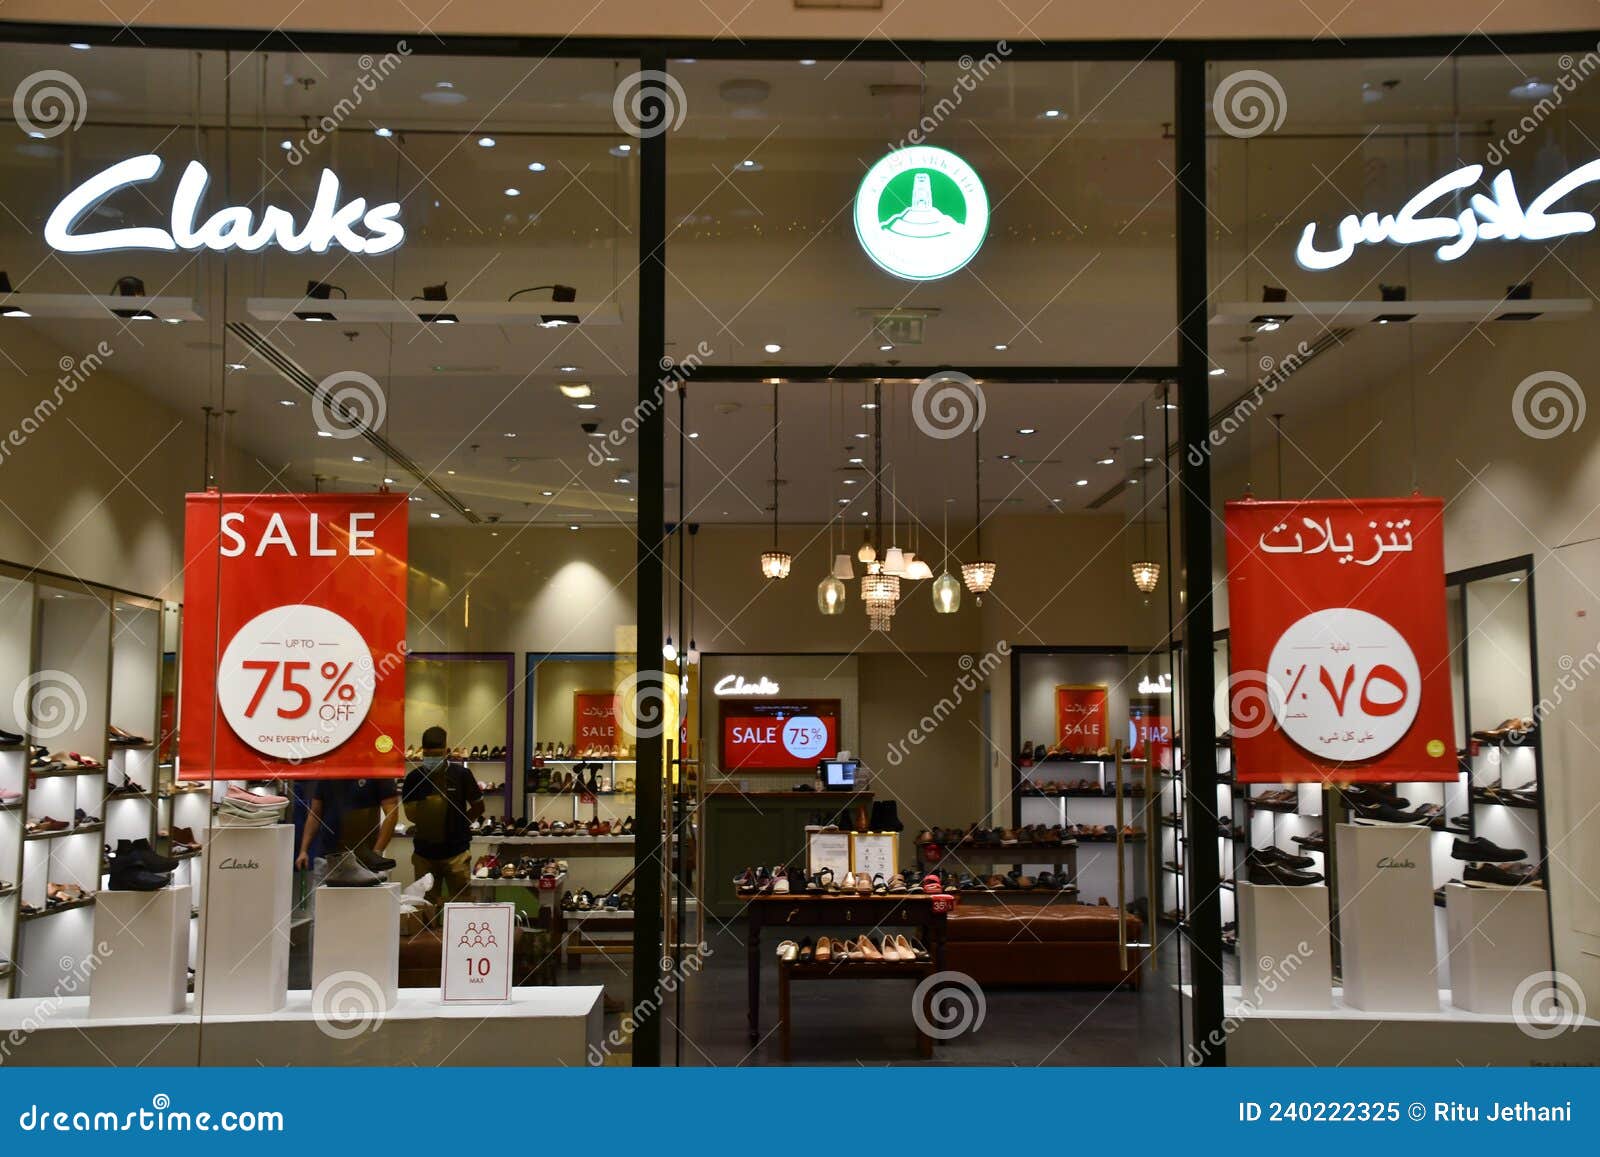 131 Clarks Store Photos - Free & Royalty-Free Stock Photos from Dreamstime